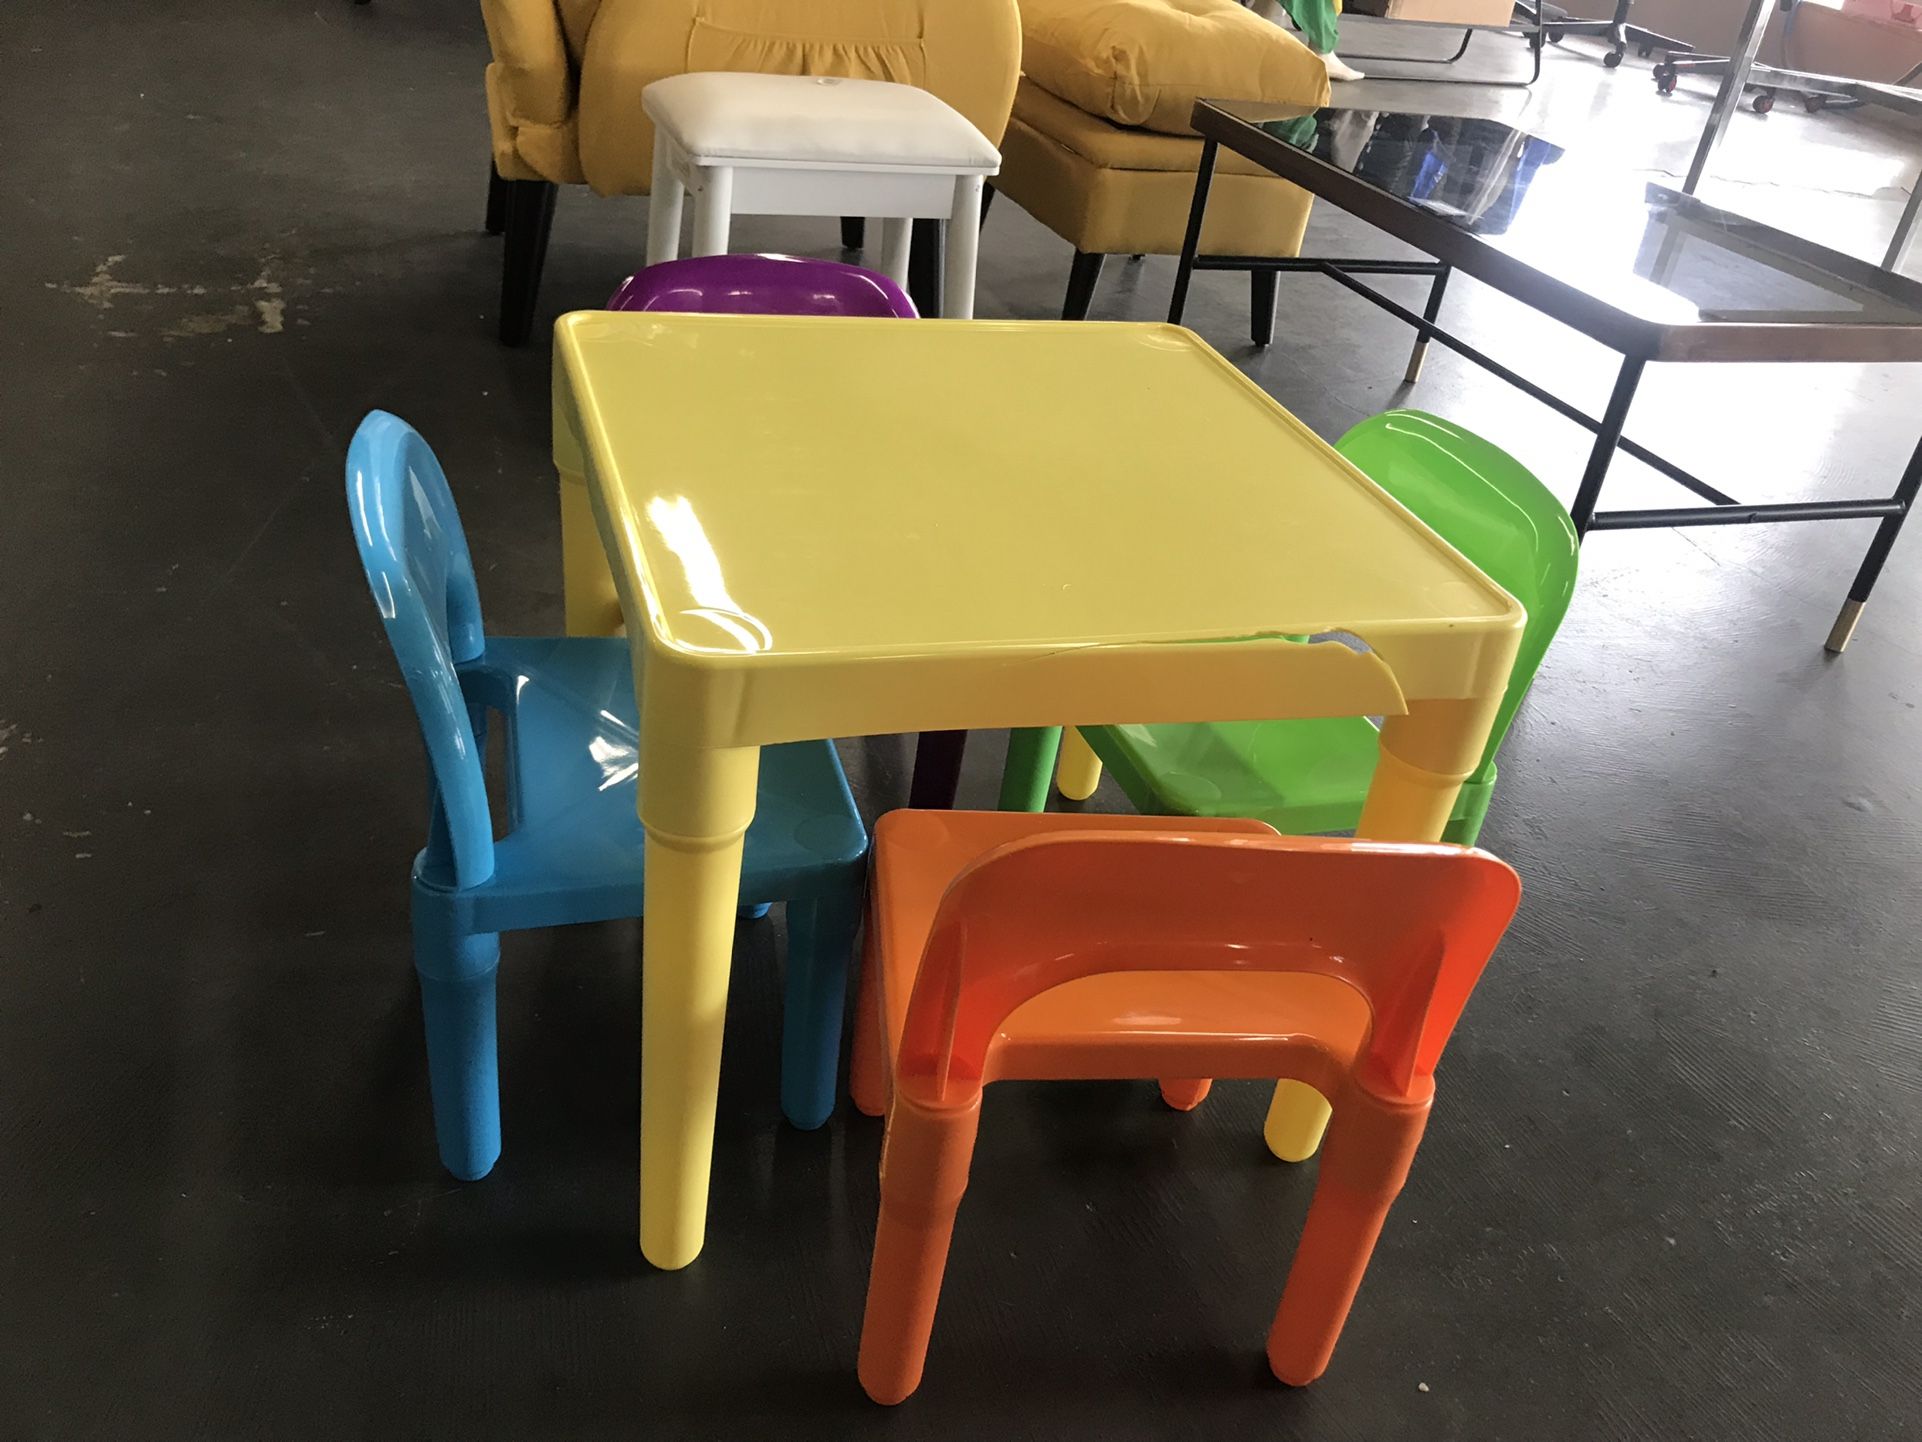 Reduced - cracked side Kids Table and Chairs Set, Colorful Child Activity Desk for Children Toddler